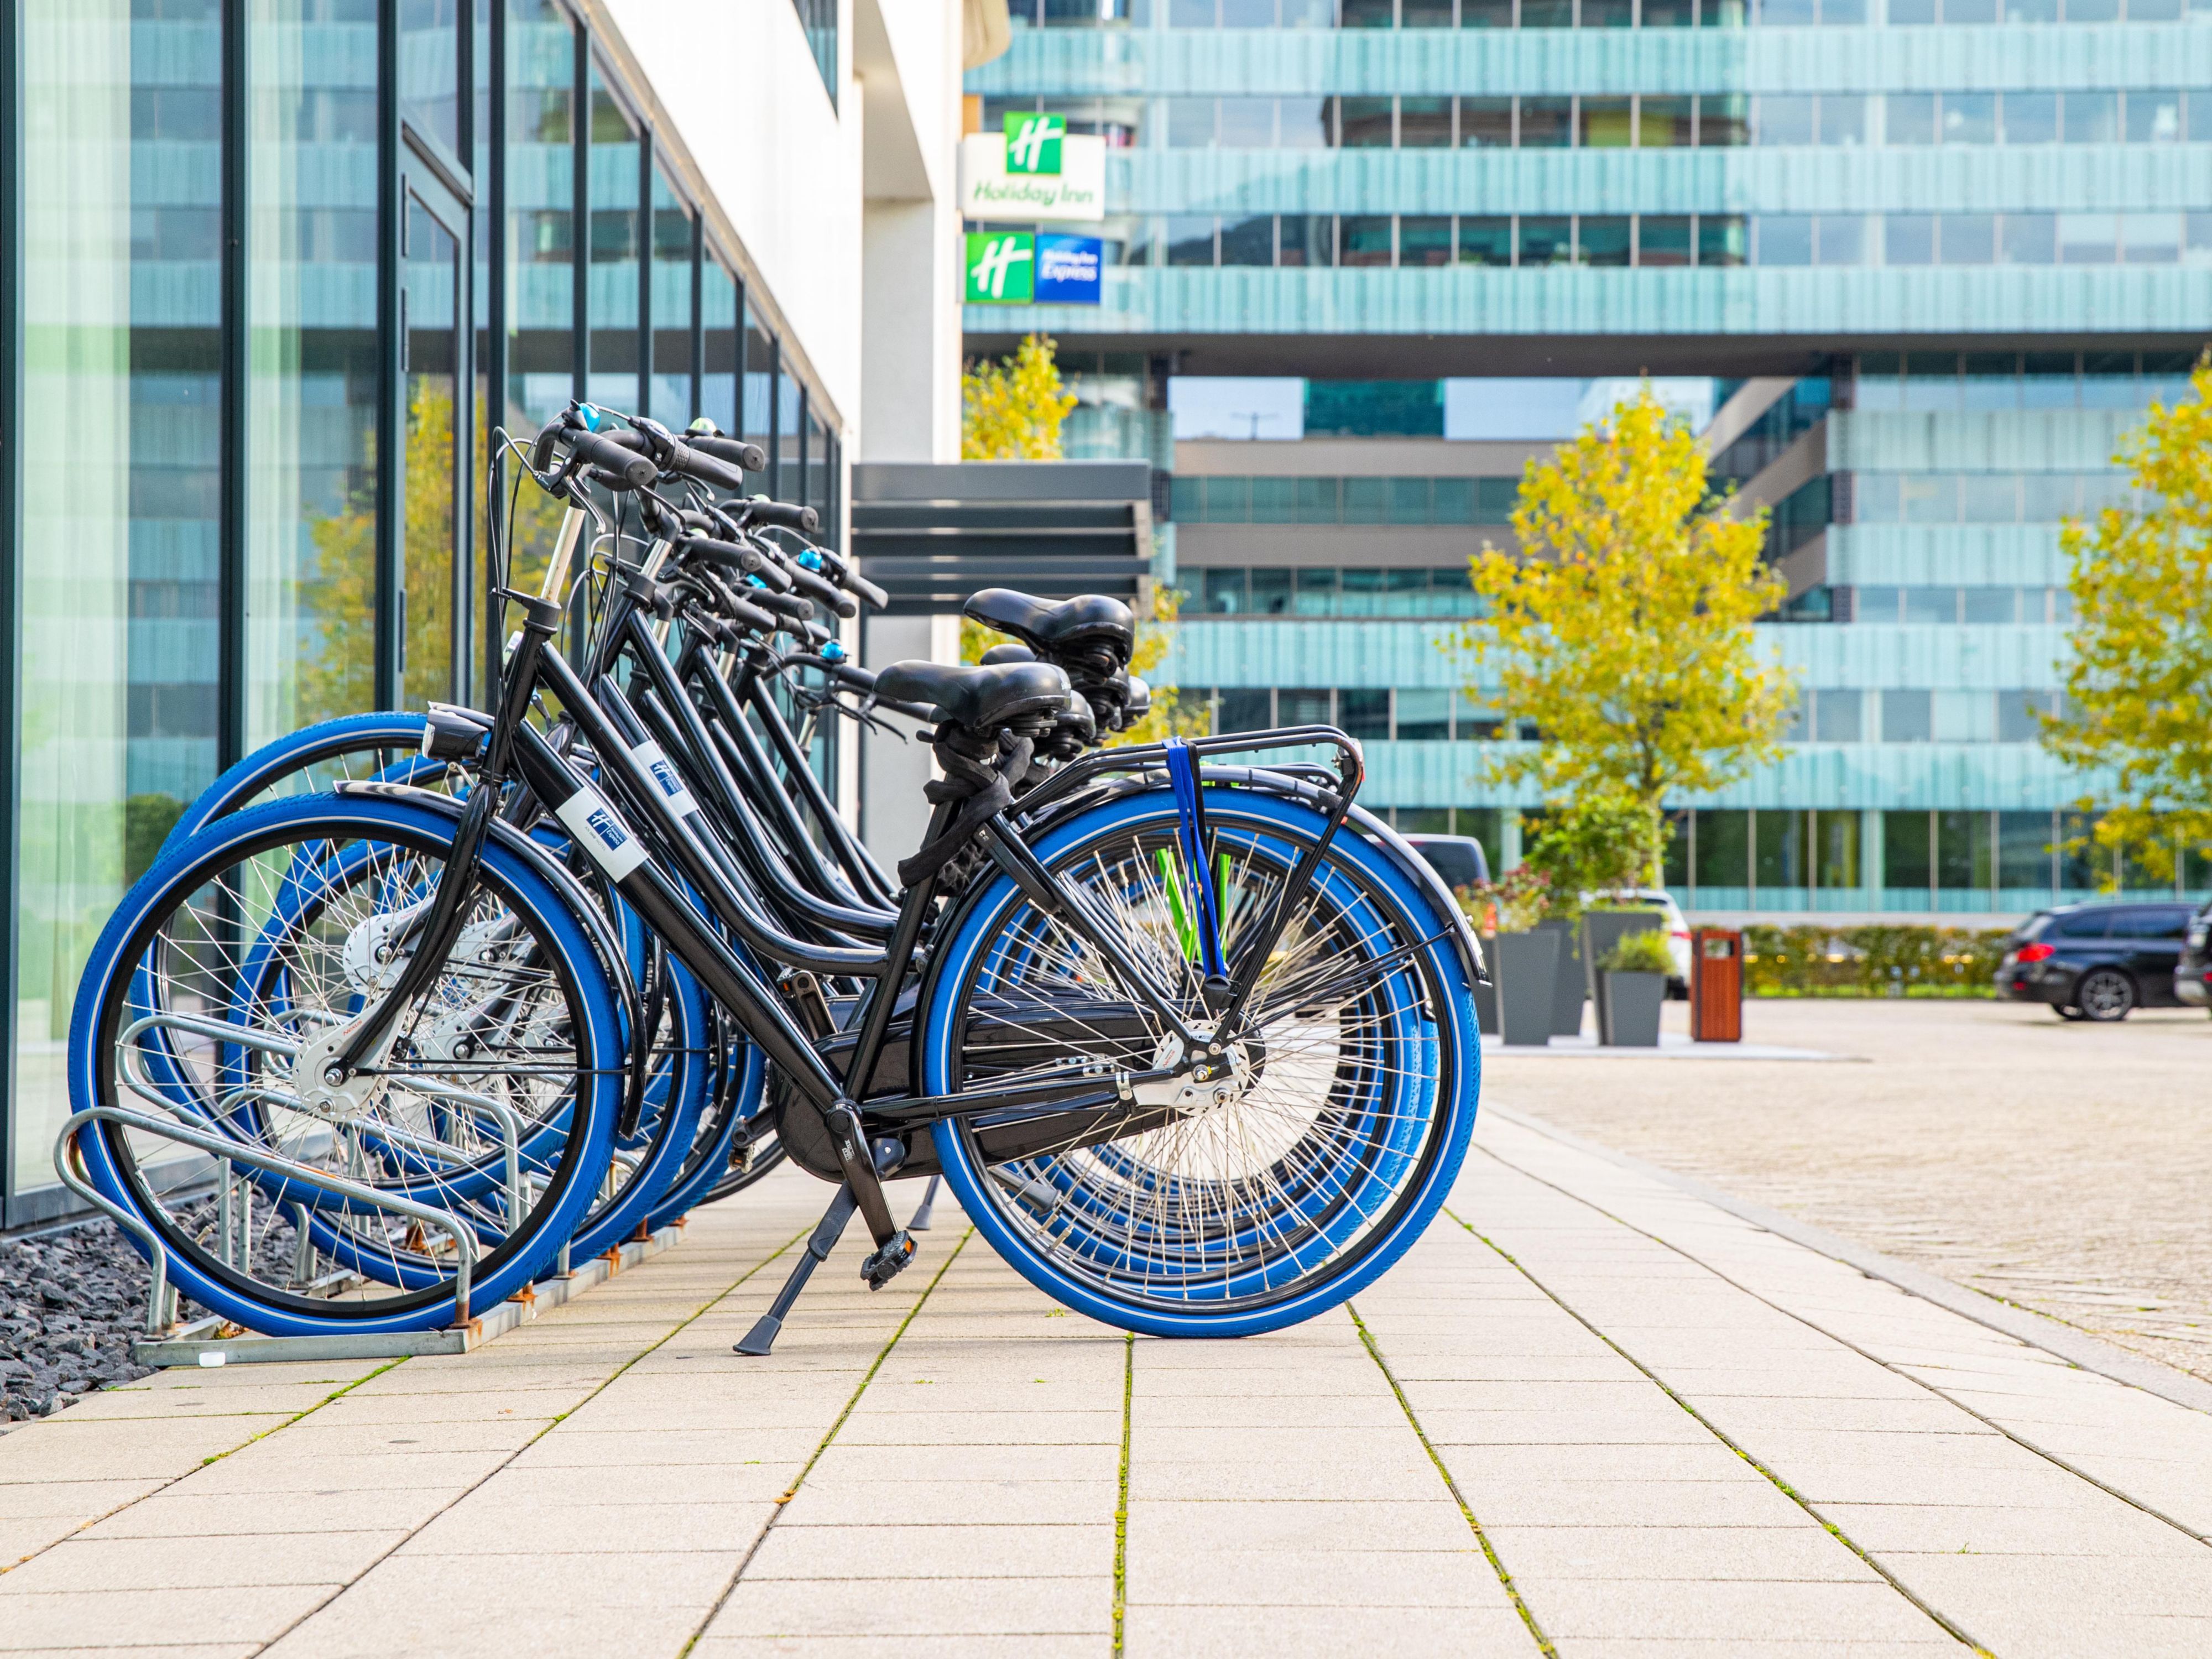 Rent your bicycle at the reception and start exploring the city the Dutch way.